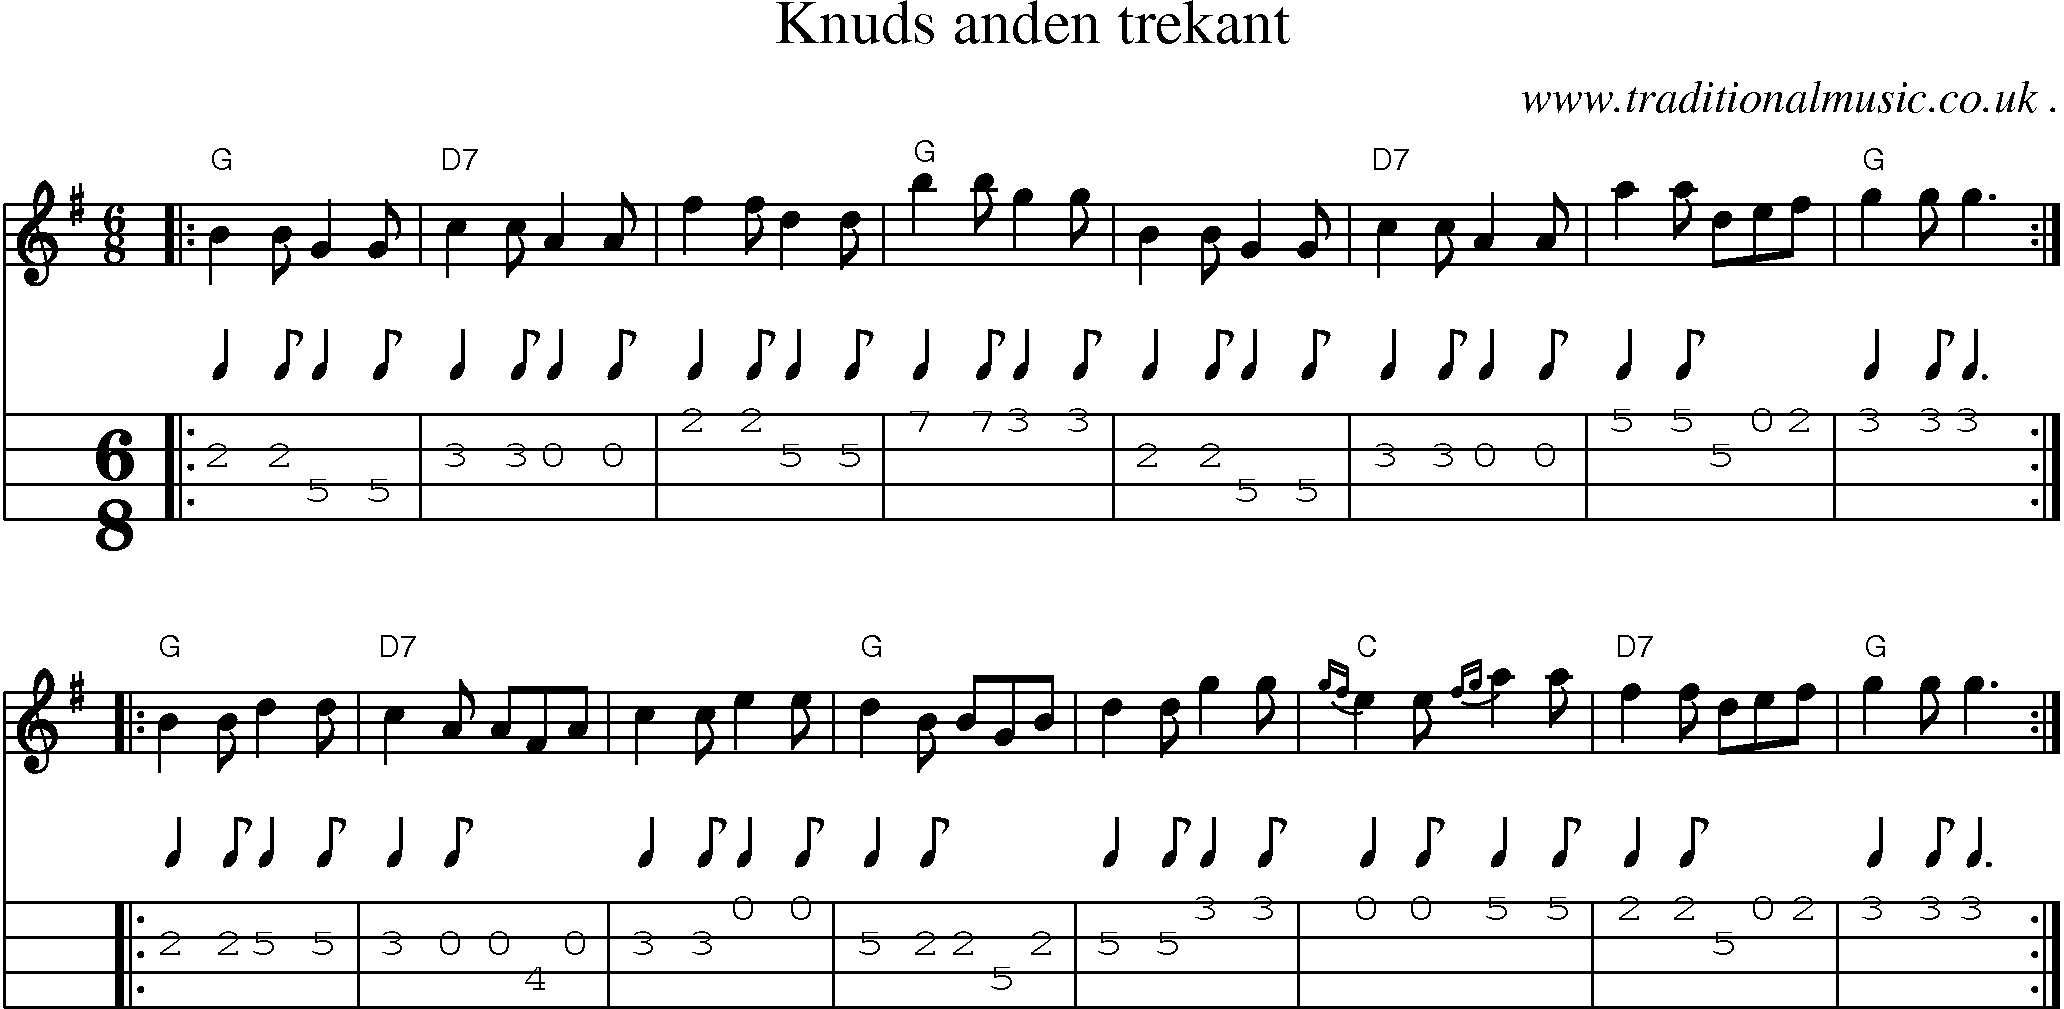 Sheet-music  score, Chords and Mandolin Tabs for Knuds Anden Trekant